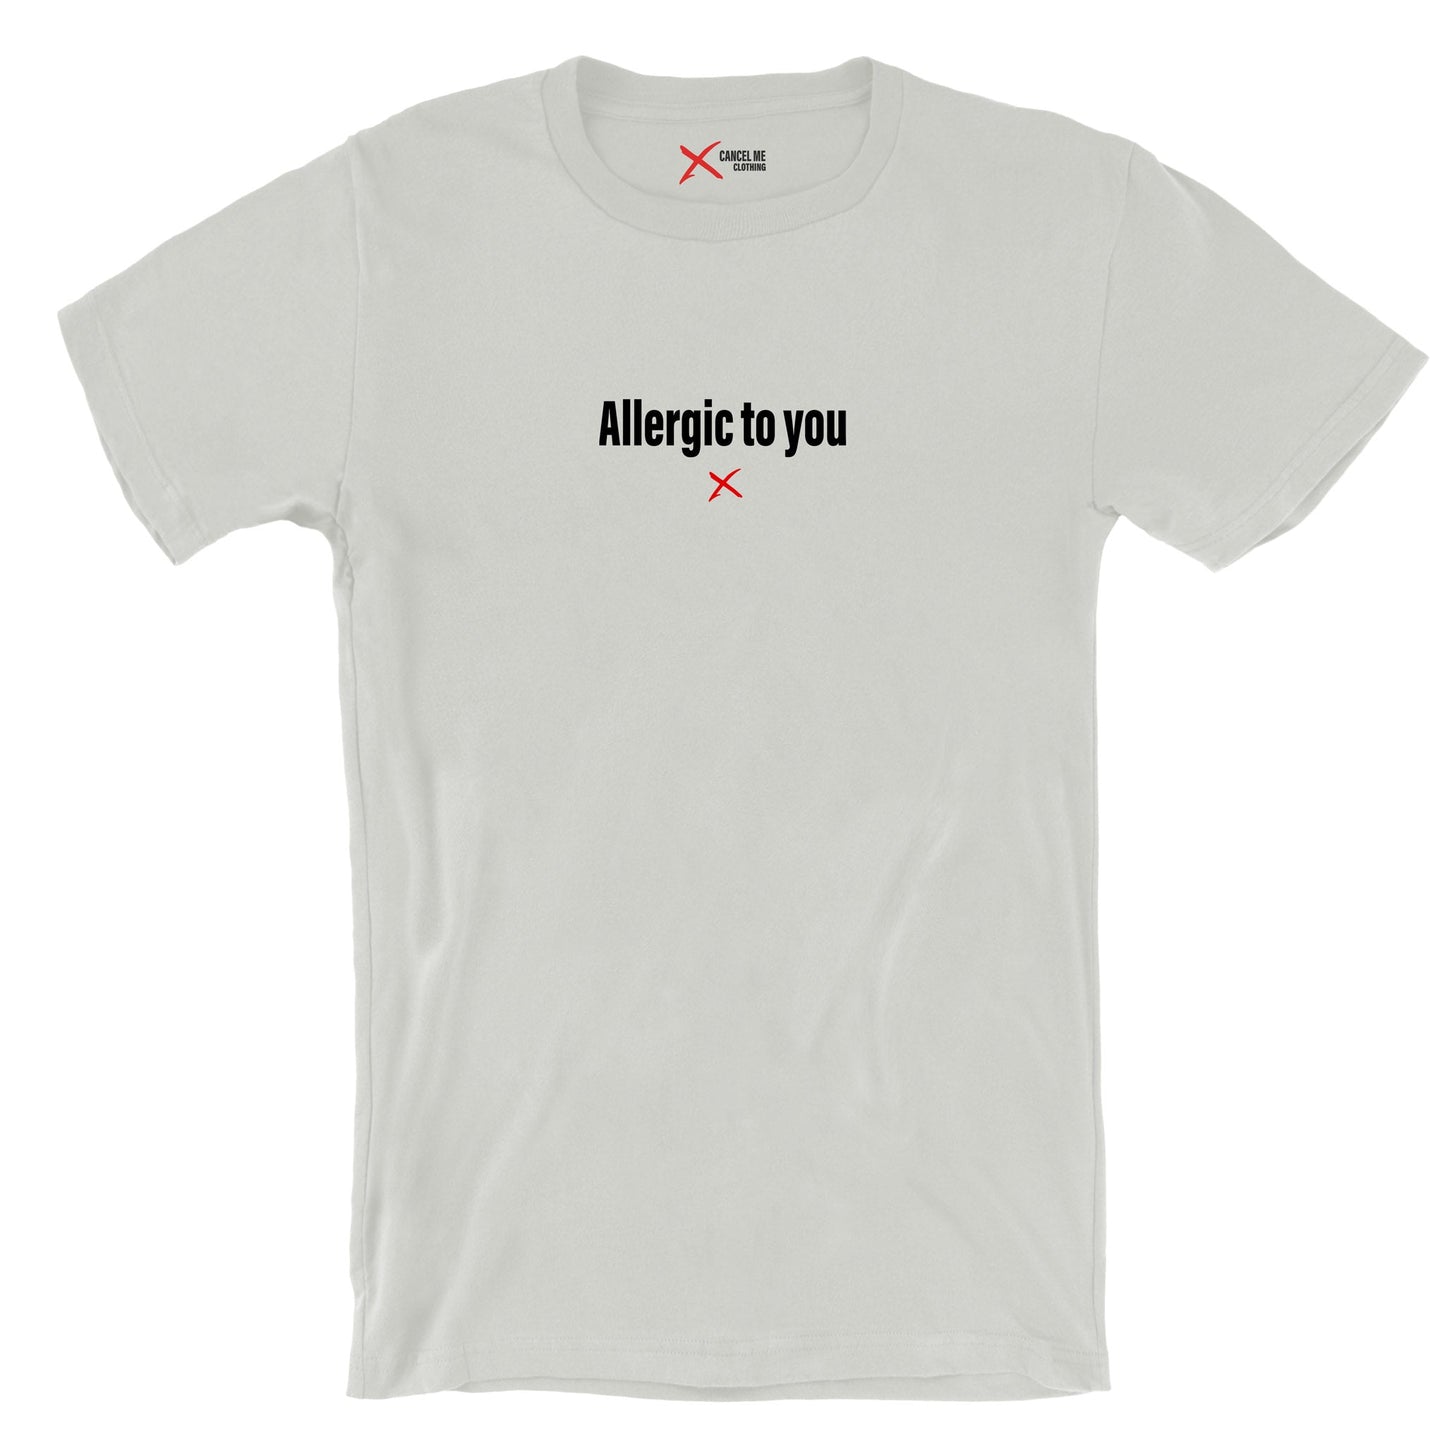 Allergic to you - Shirt